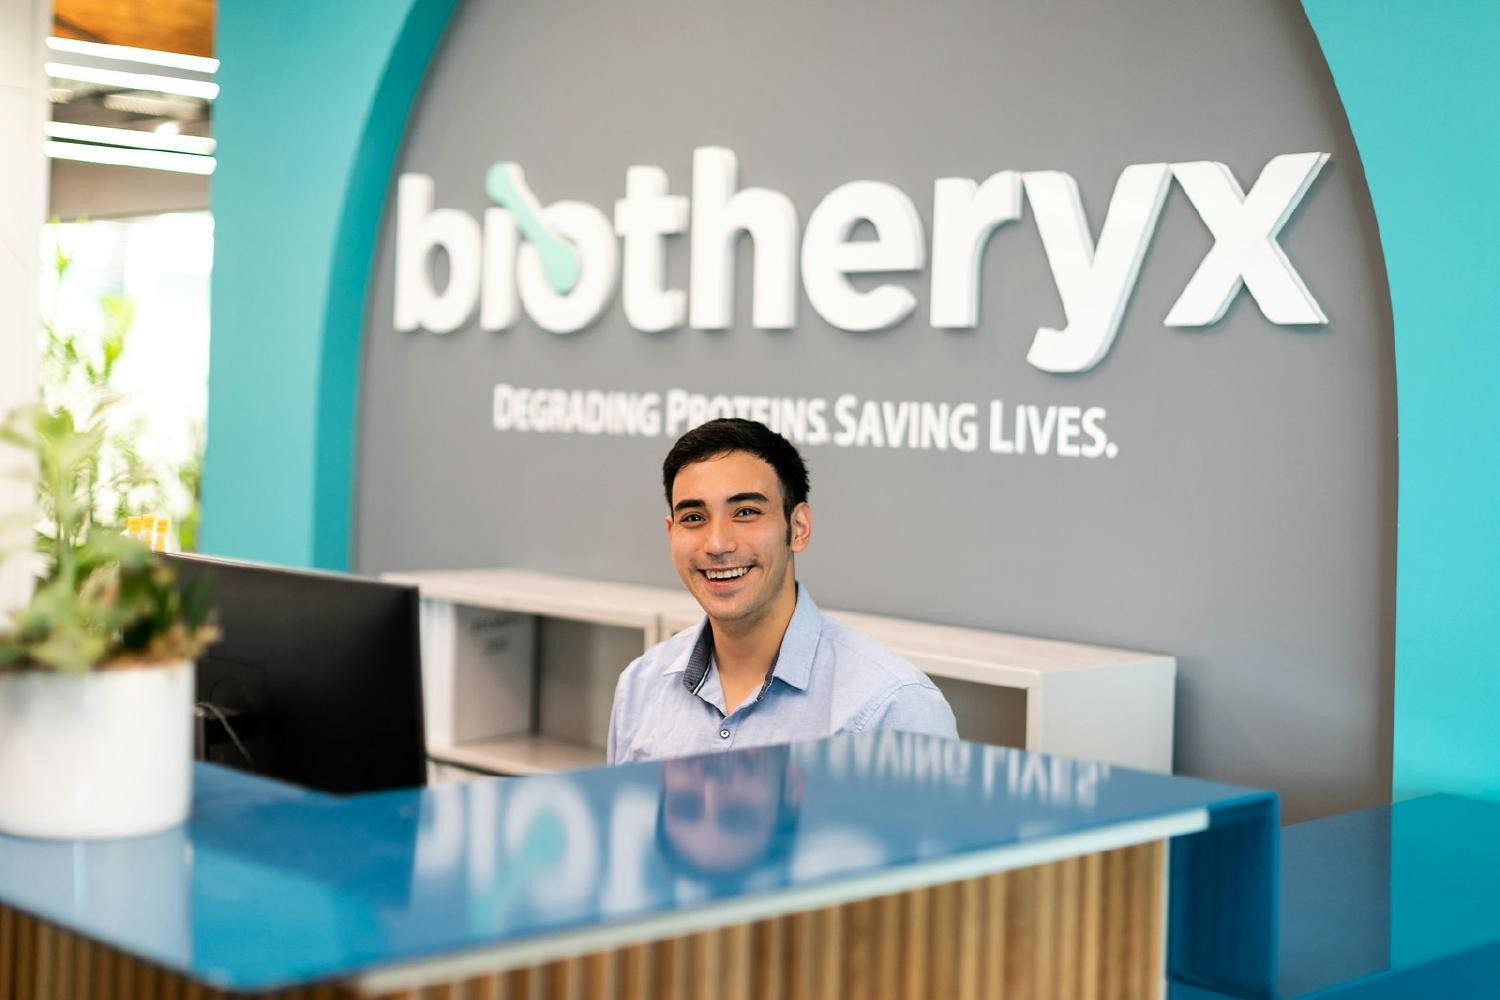 The Smiling Face of Biotheryx